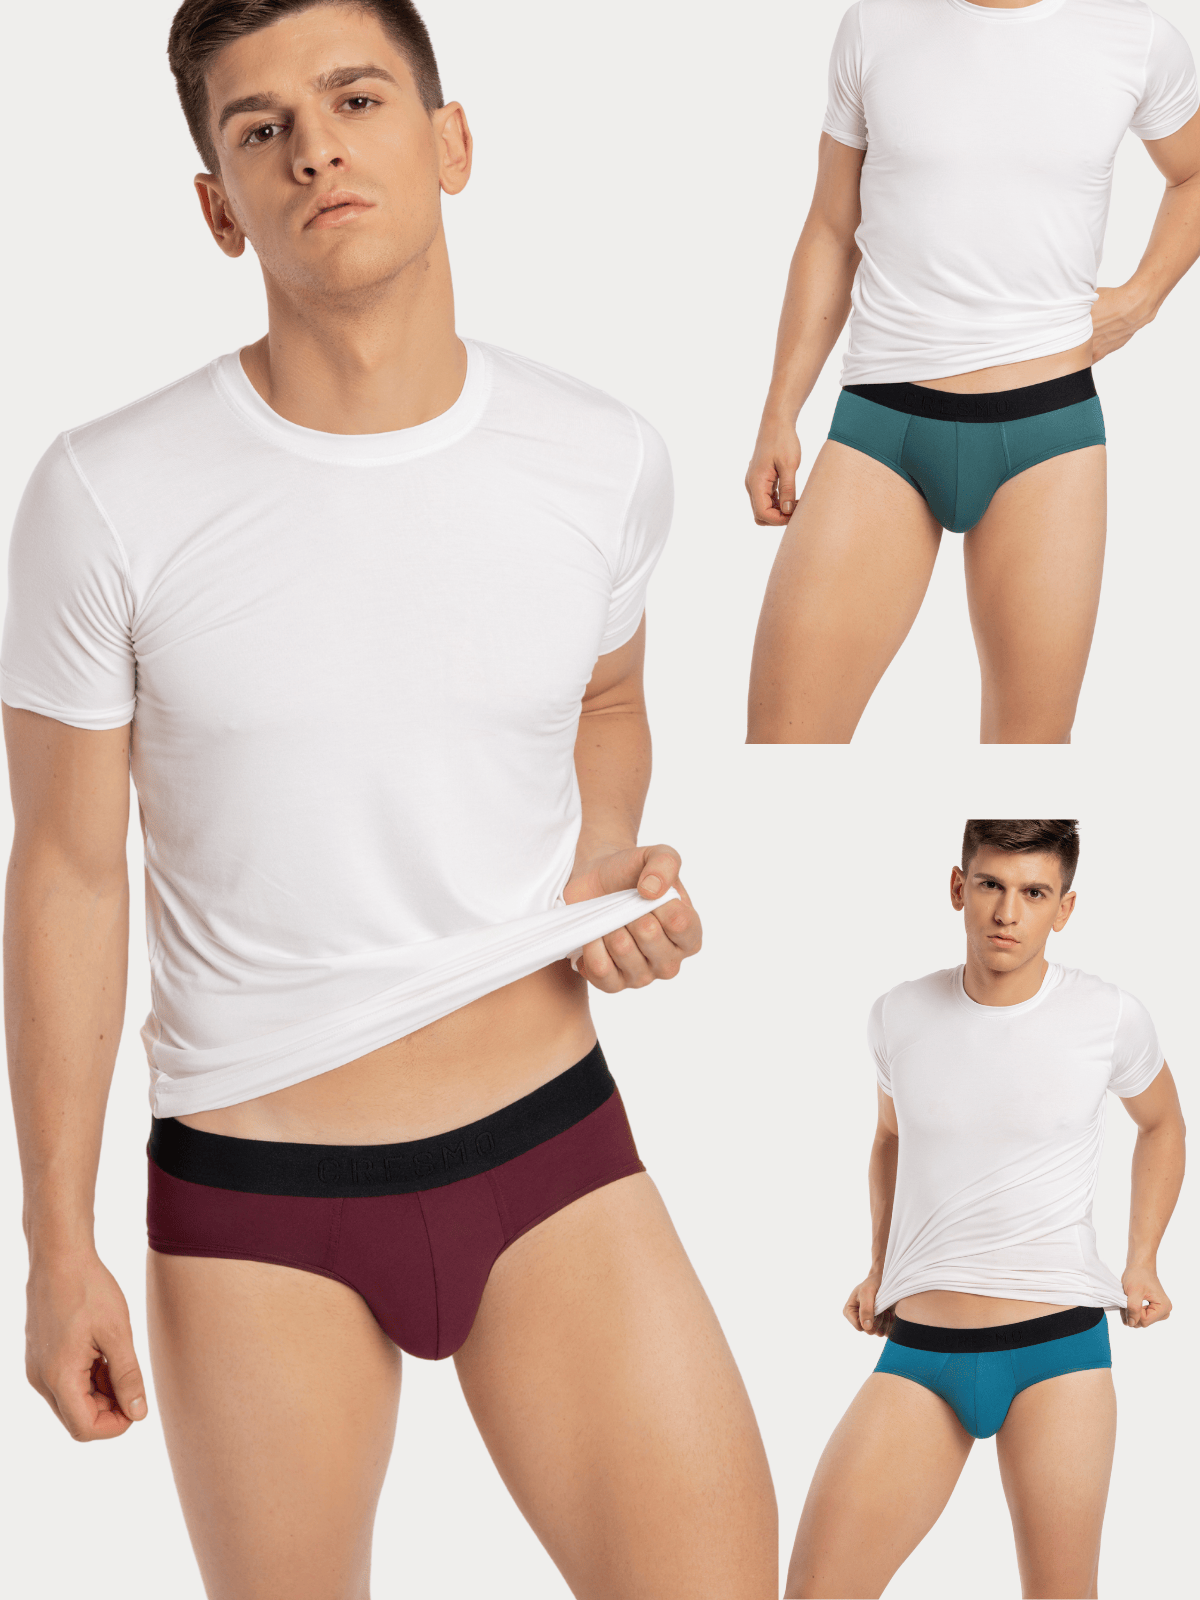 CRESMO | CRESMO Men's Anti-Microbial Micro Modal Underwear Breathable Ultra Soft Comfort Lightweight Brief (Pack of 3)